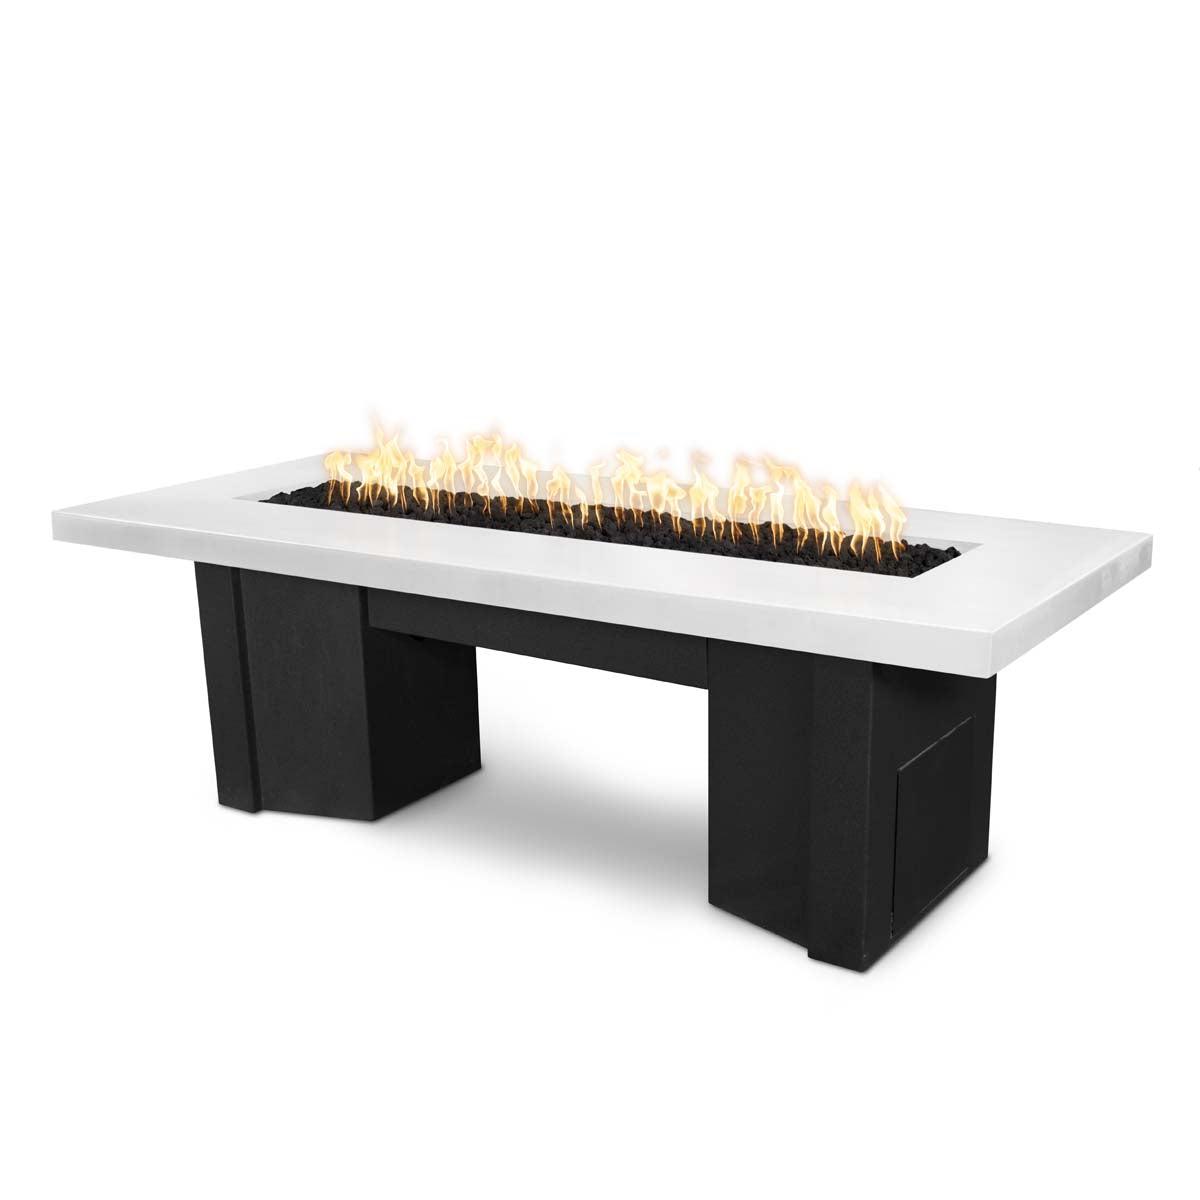 The Outdoor Plus Rectangular Alameda 60" Black & White Powder Coated Natural Gas Fire Pit with 110V Electronic Ignition